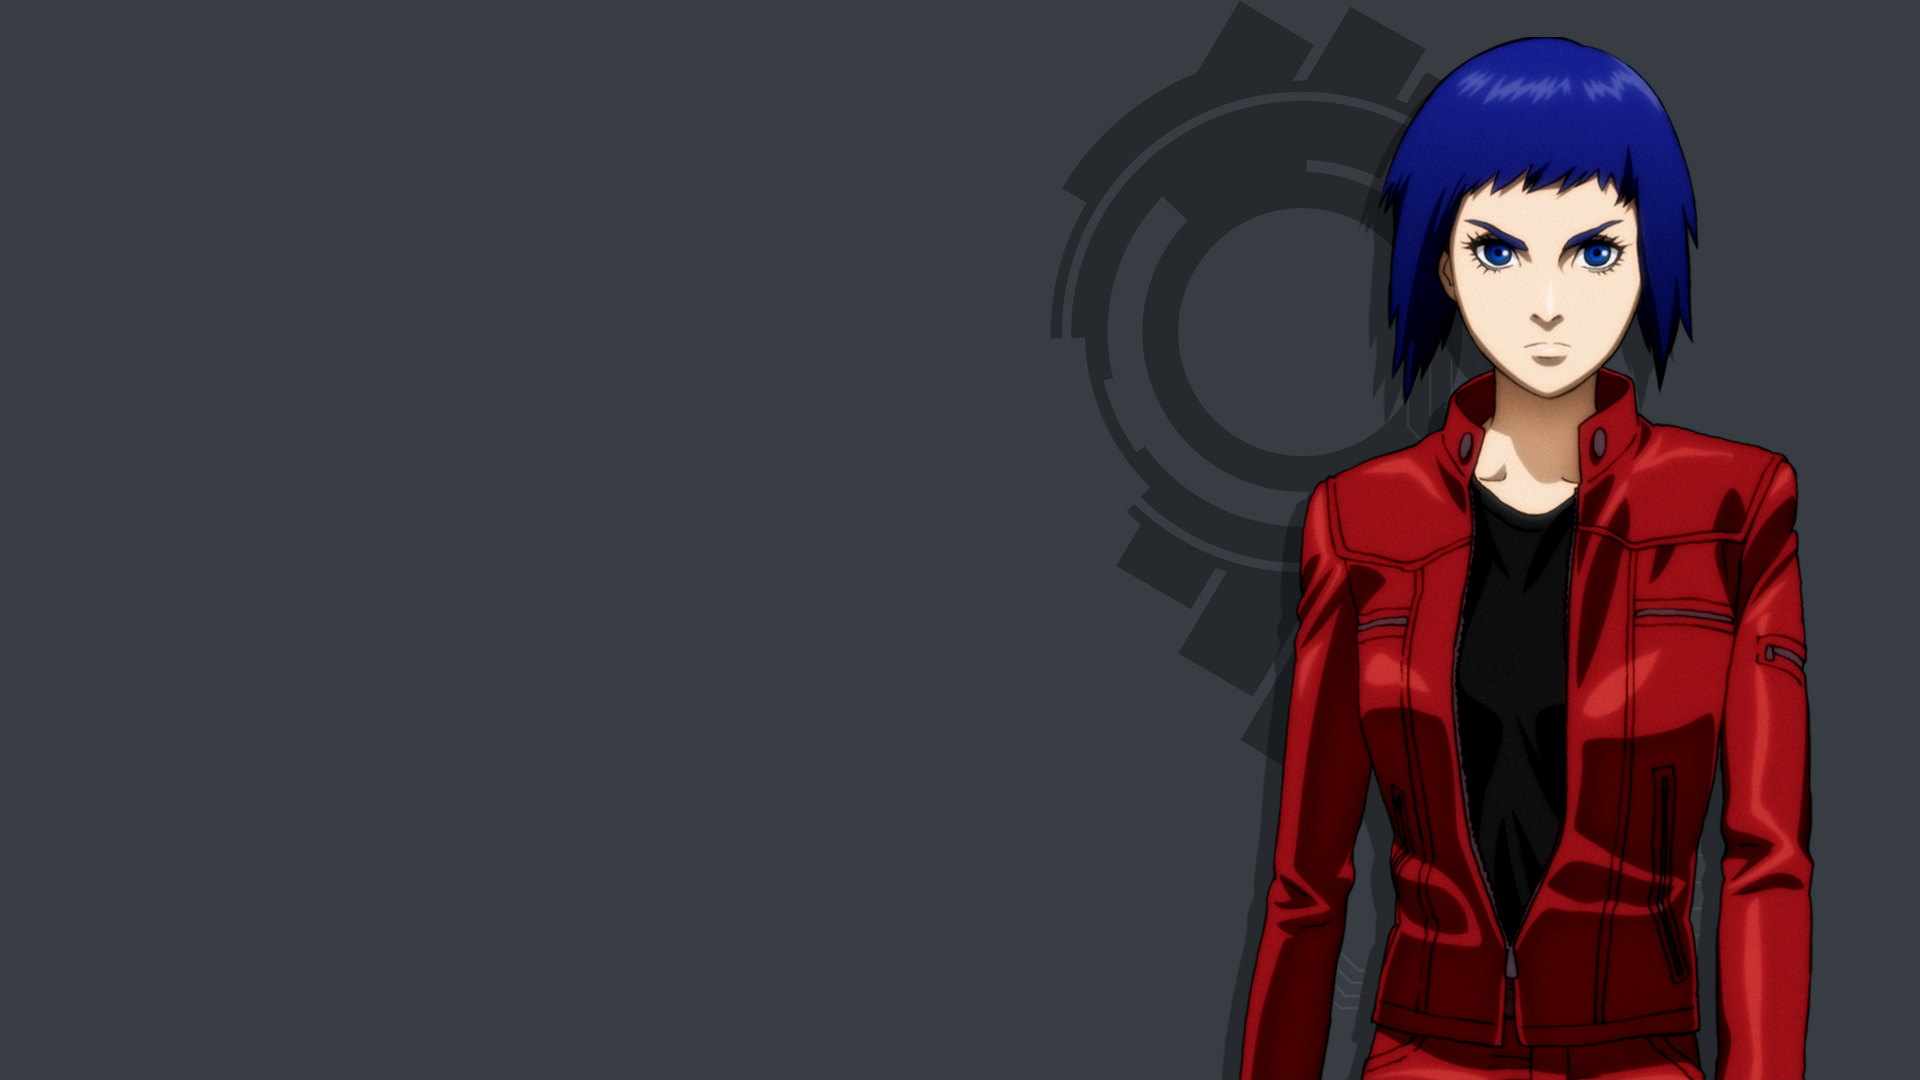 Anime 1920x1080 Ghost in the Shell Kusanagi Motoko Ghost in the Shell: ARISE anime anime girls blue hair gray background blue eyes angry face